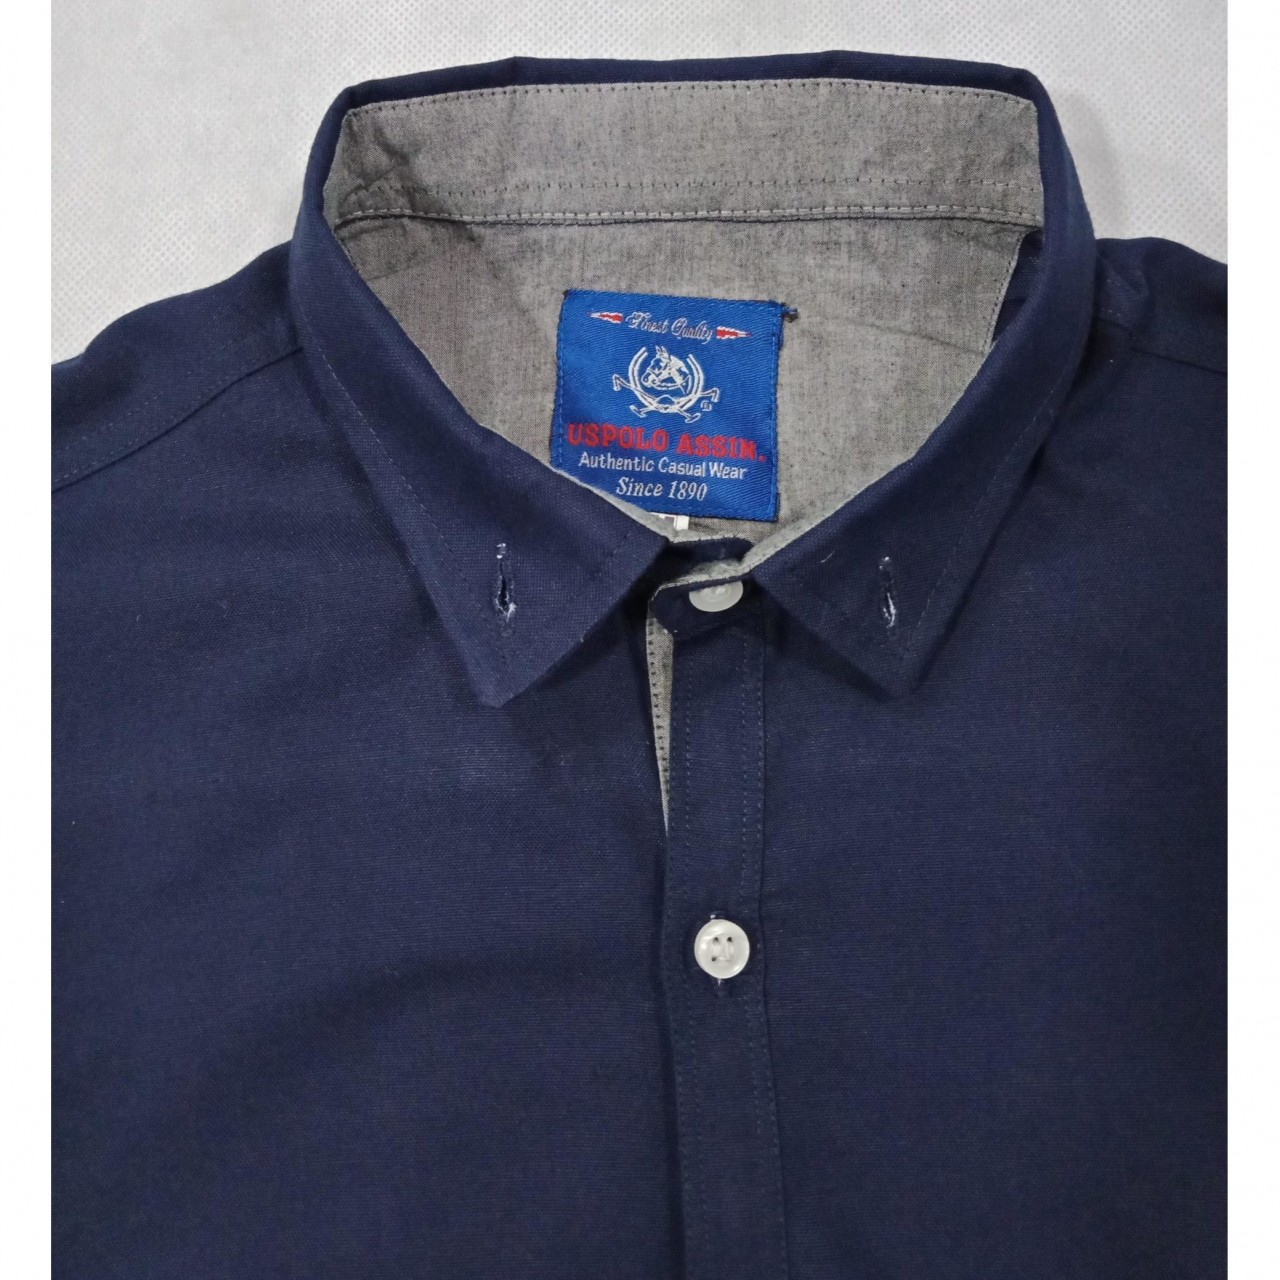 Casual Button Down Shirt Perfect For Casual Wearing - Blue